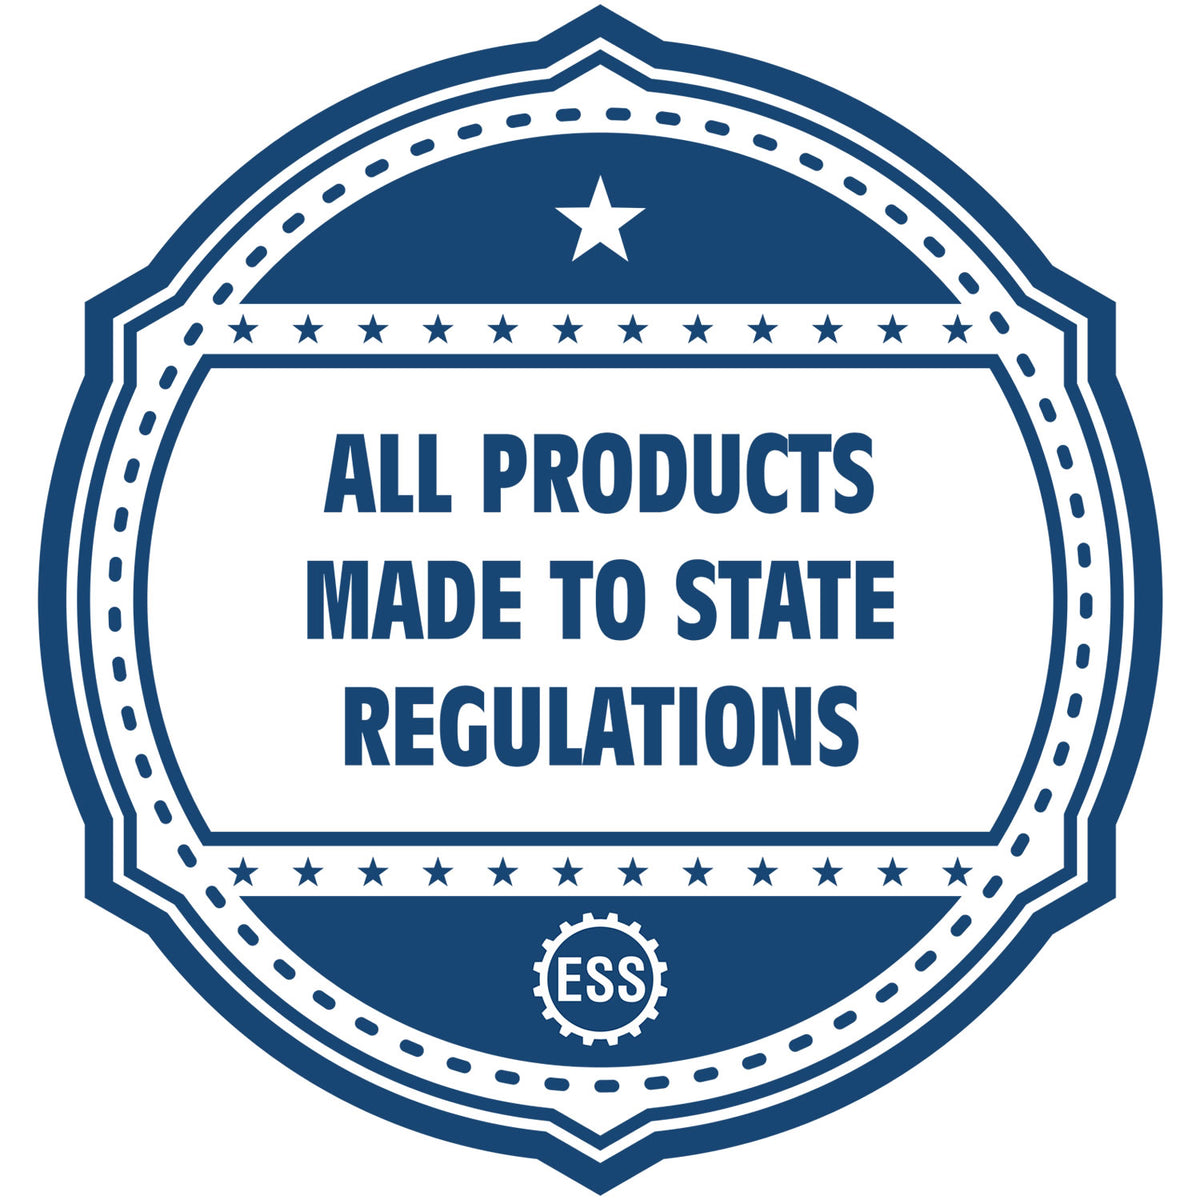 An icon or badge element for the Digital New Mexico Landscape Architect Stamp showing that this product is made in compliance with state regulations.